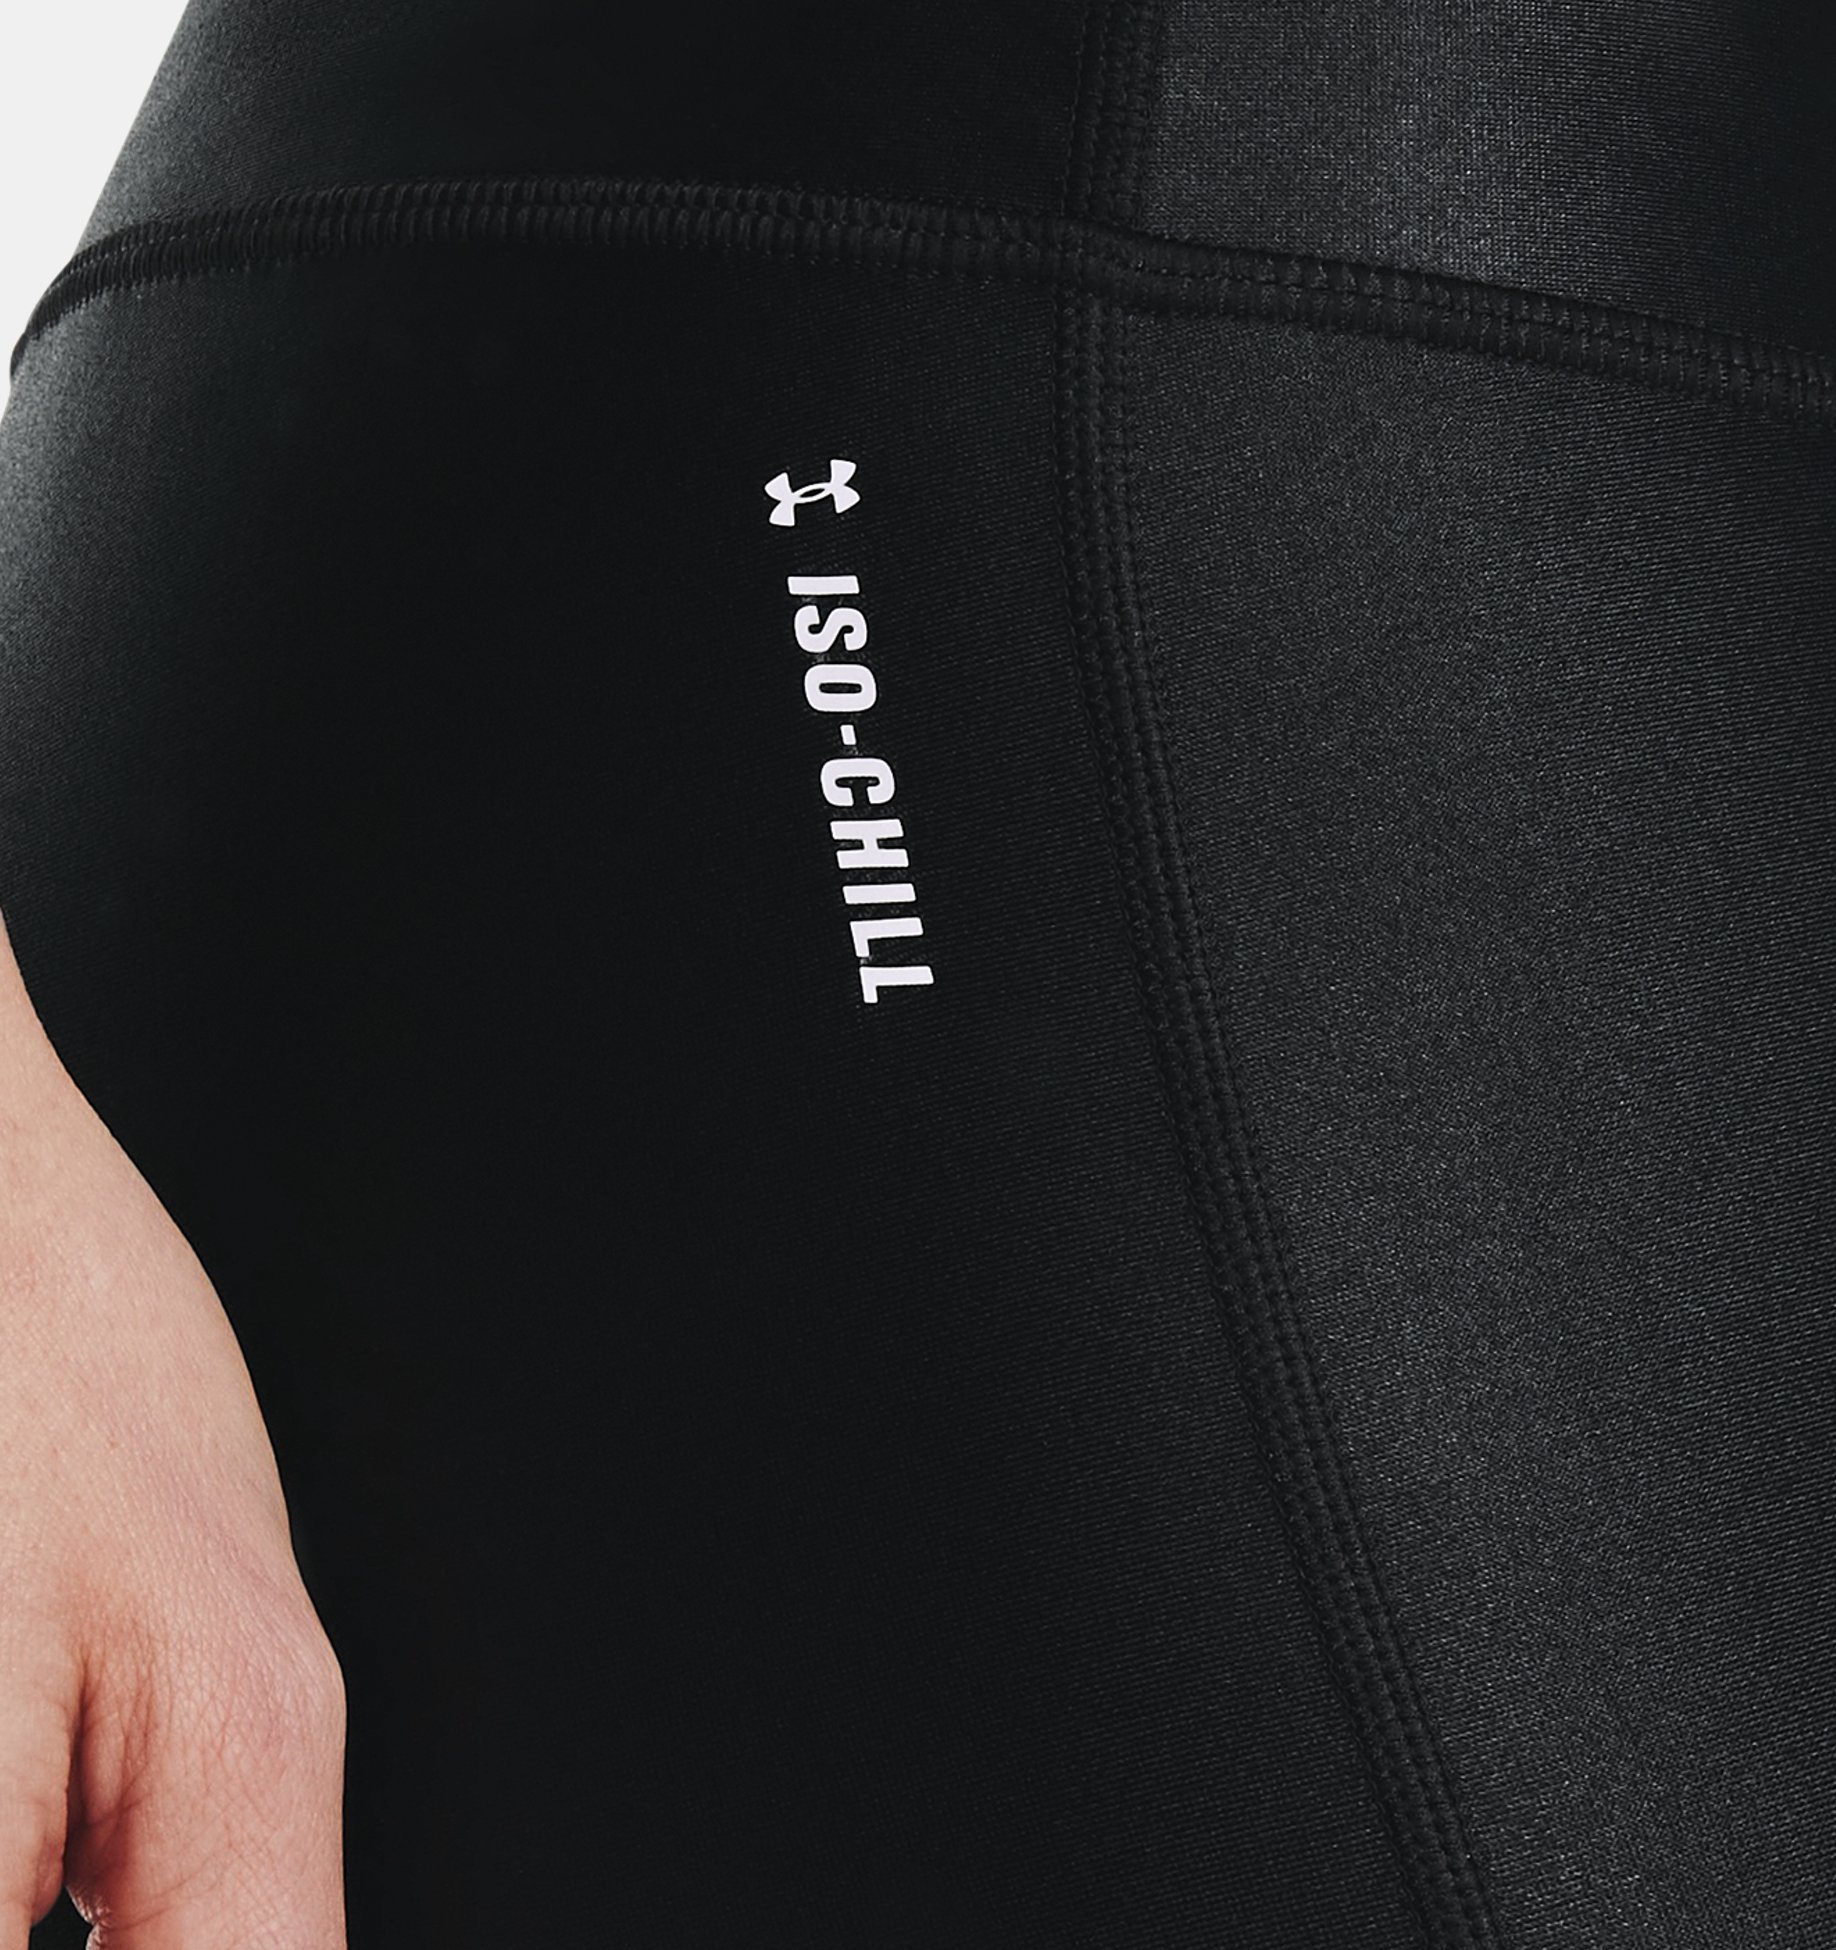 https://underarmour.scene7.com/is/image/Underarmour/V5-1361023-001_SIDEDET?rp=standard-0pad|pdpZoomDesktop&scl=0.72&fmt=jpg&qlt=85&resMode=sharp2&cache=on,on&bgc=f0f0f0&wid=1836&hei=1950&size=1500,1500